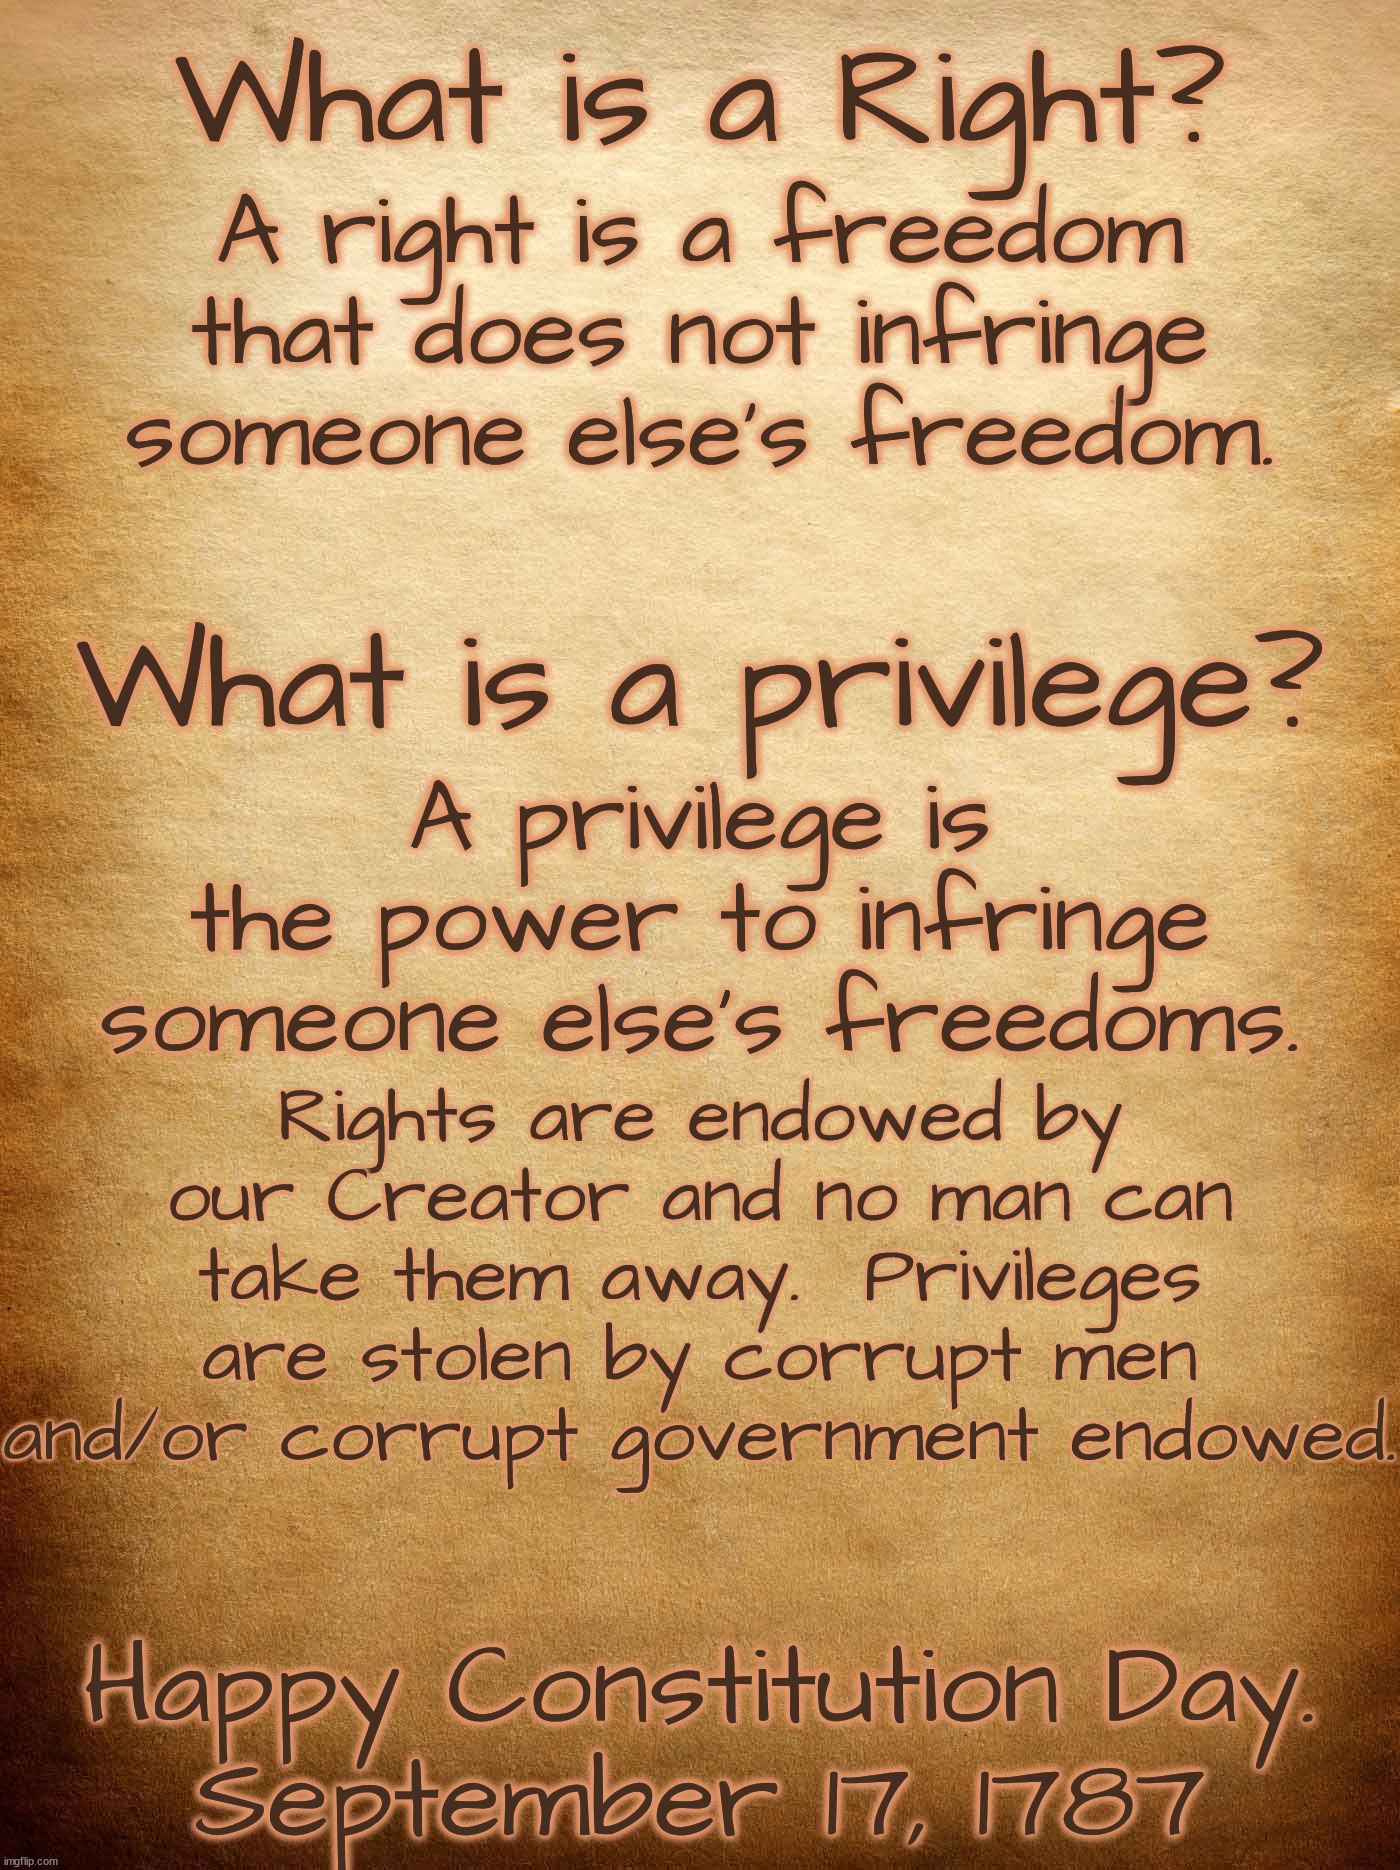 We must make our politicians (and the Democrats) to understand this, before they permanently infringe all our rights. | What is a Right? A right is a freedom that does not infringe someone else's freedom. What is a privilege? A privilege is the power to infringe someone else's freedoms. Rights are endowed by our Creator and no man can take them away.  Privileges are stolen by corrupt men and/or corrupt government endowed. Happy Constitution Day.
September 17, 1787 | image tagged in rights,privilege,freedom more valuable than life | made w/ Imgflip meme maker